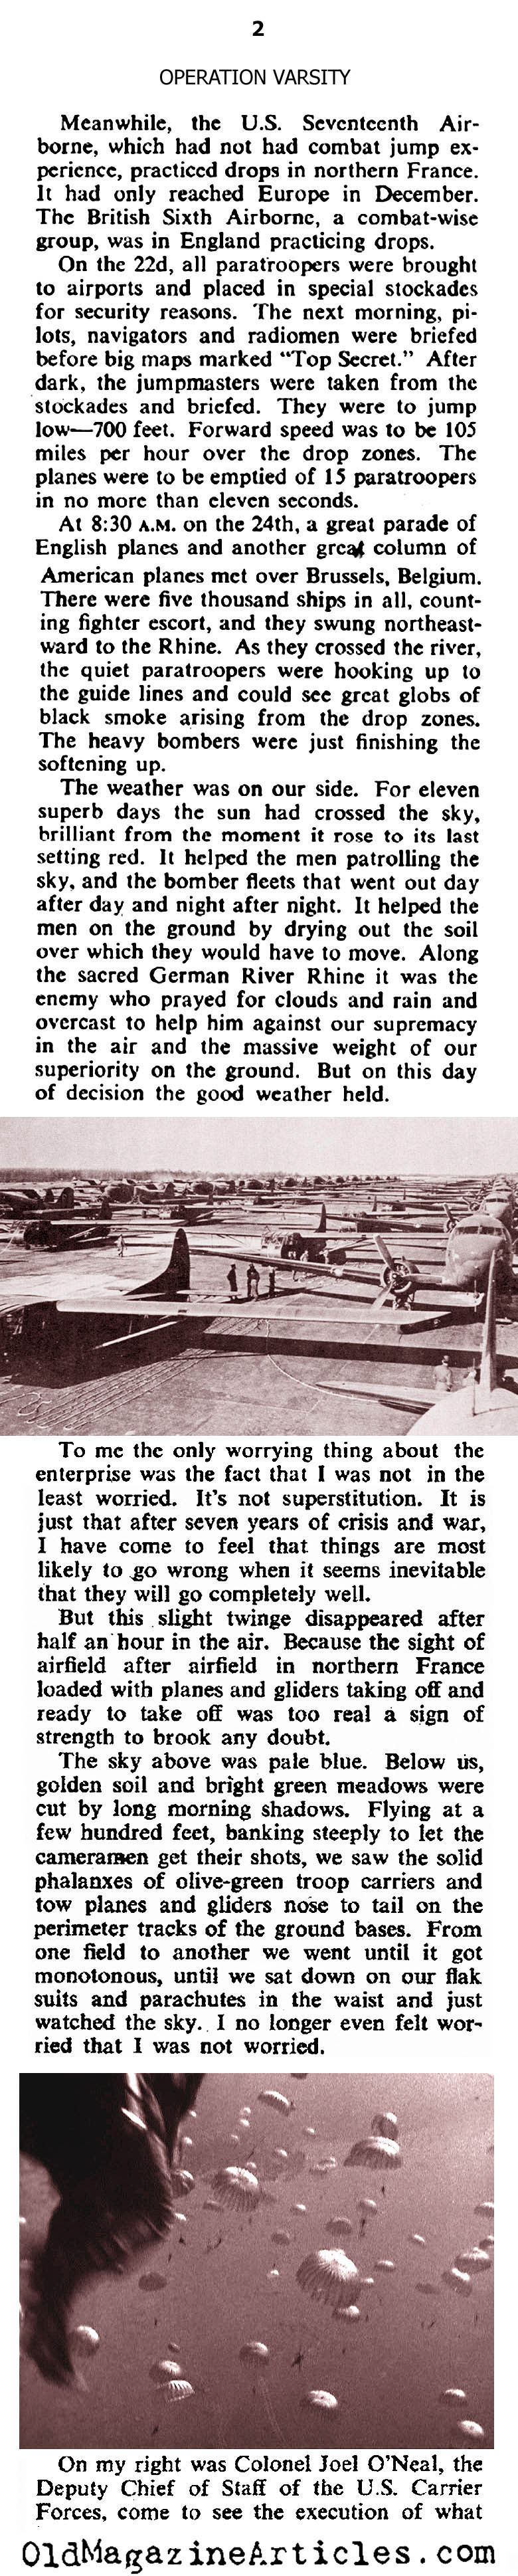 Operation Varsity: The Last Parachute Drop of the War (Collier's Magazine, 1945)